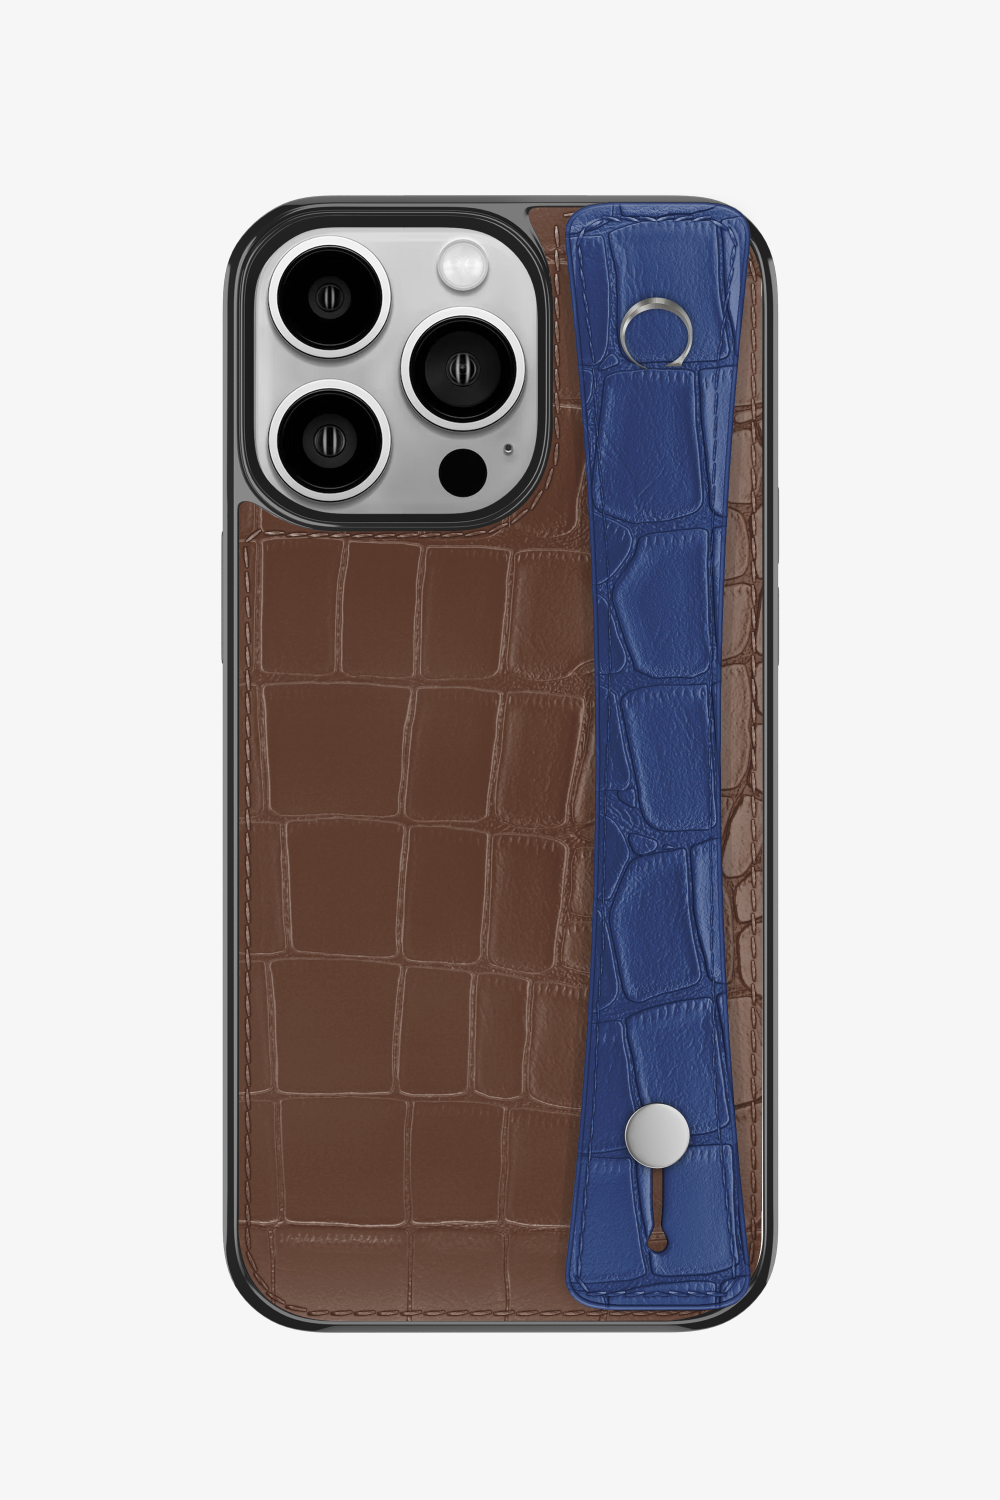 Alligator Sports Strap Case for iPhone 14 Pro - Cocoa / Navy Blue - zollofrance